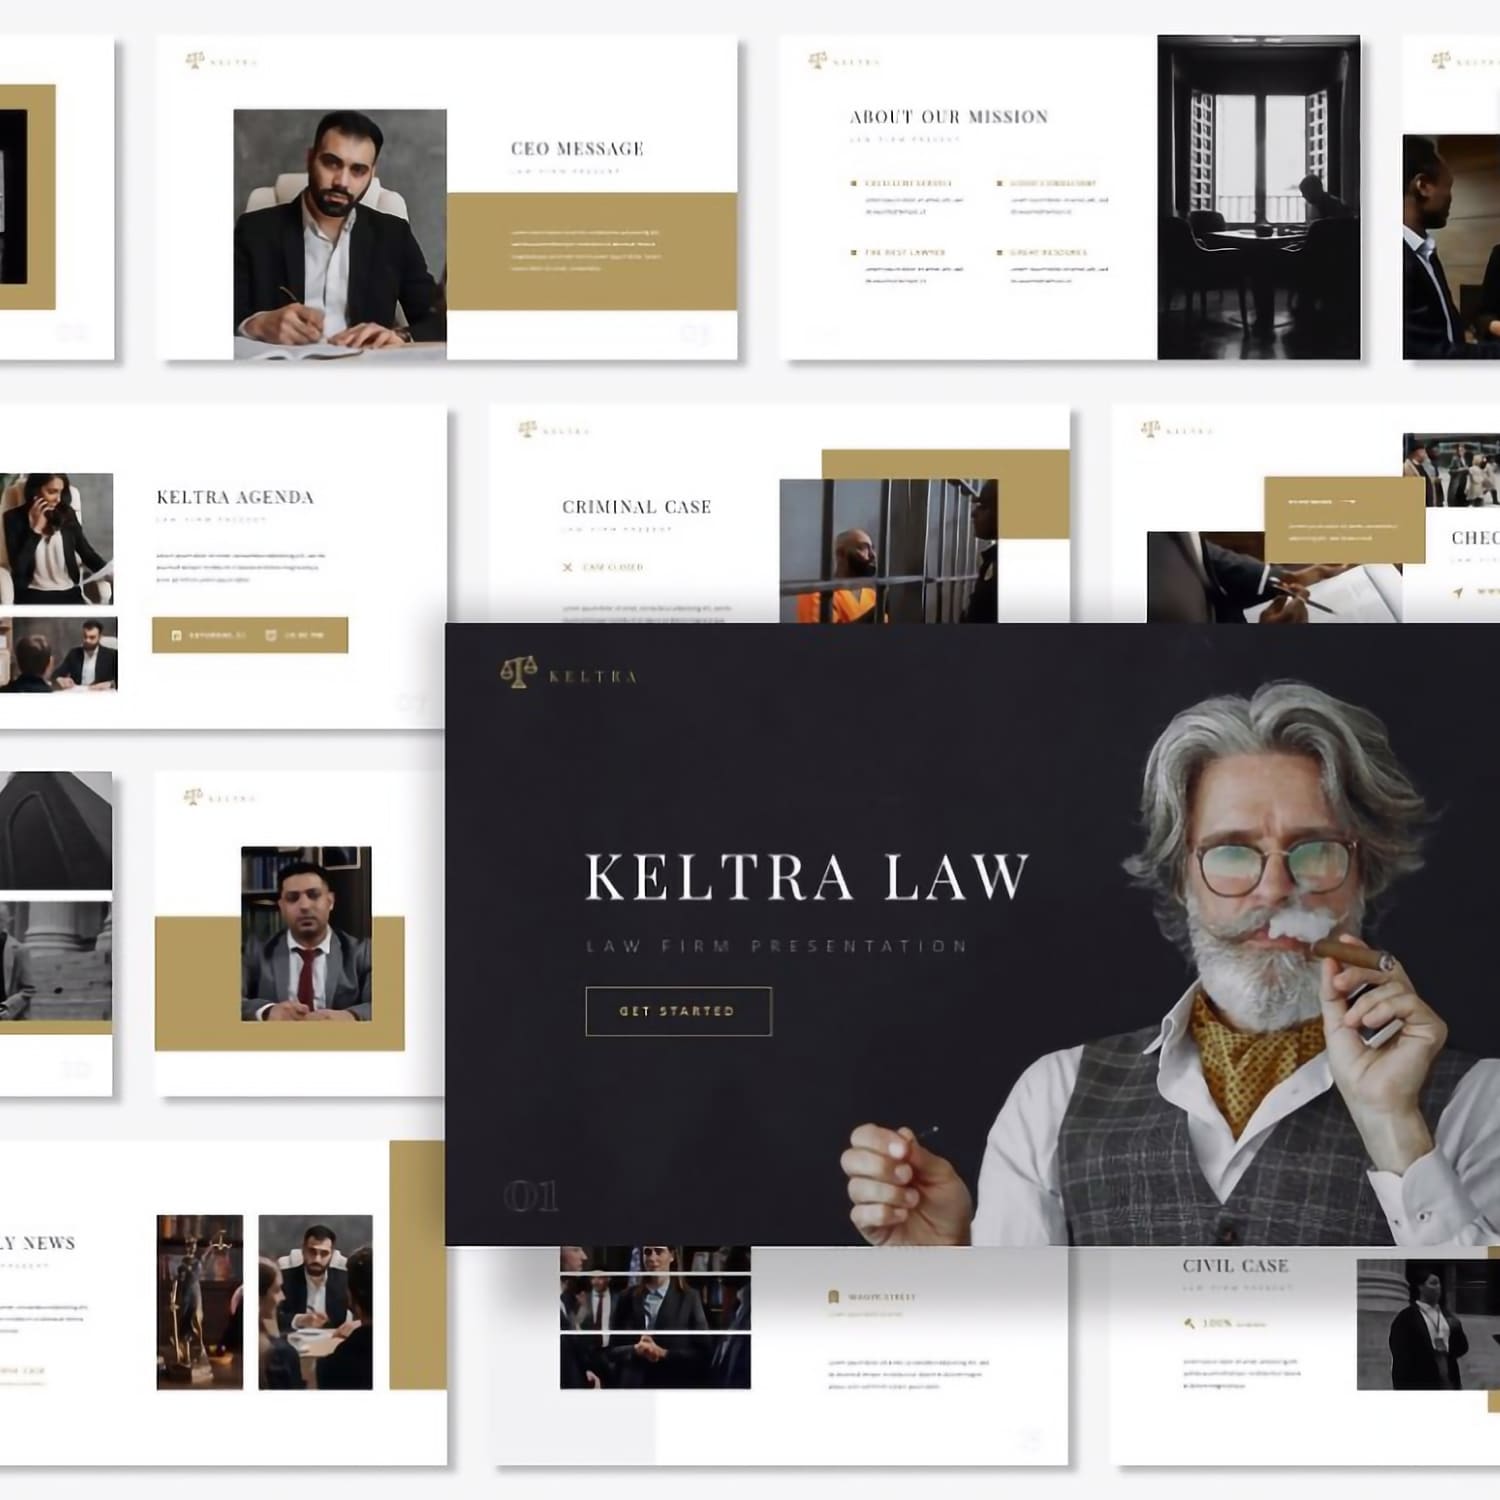 Keltra - Law Firm PowerPoint cover.